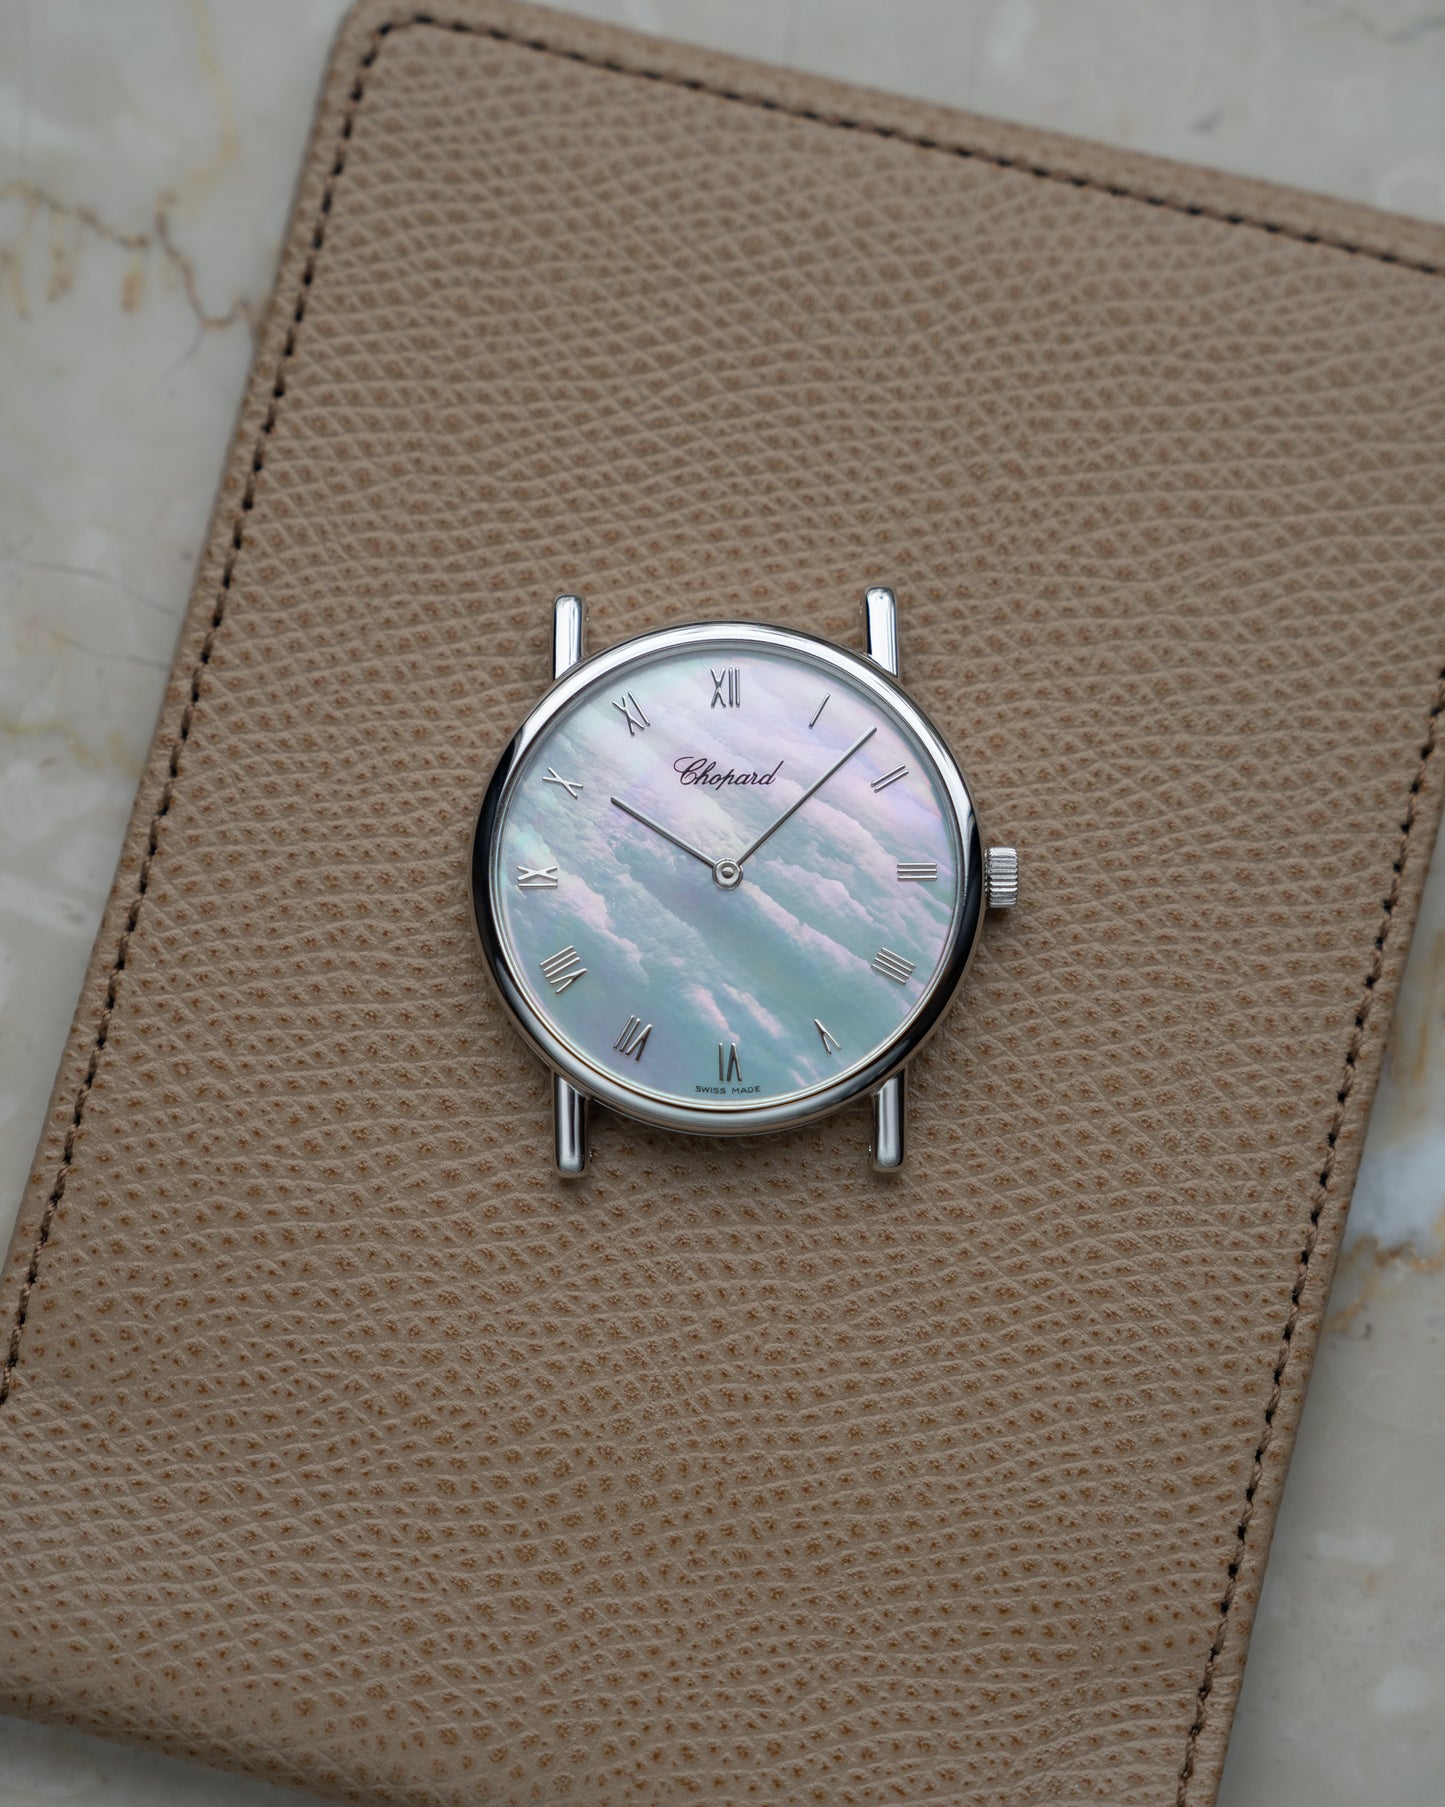 Chopard dress watch in White Gold with Mother of Pearl dial, manual wind movement